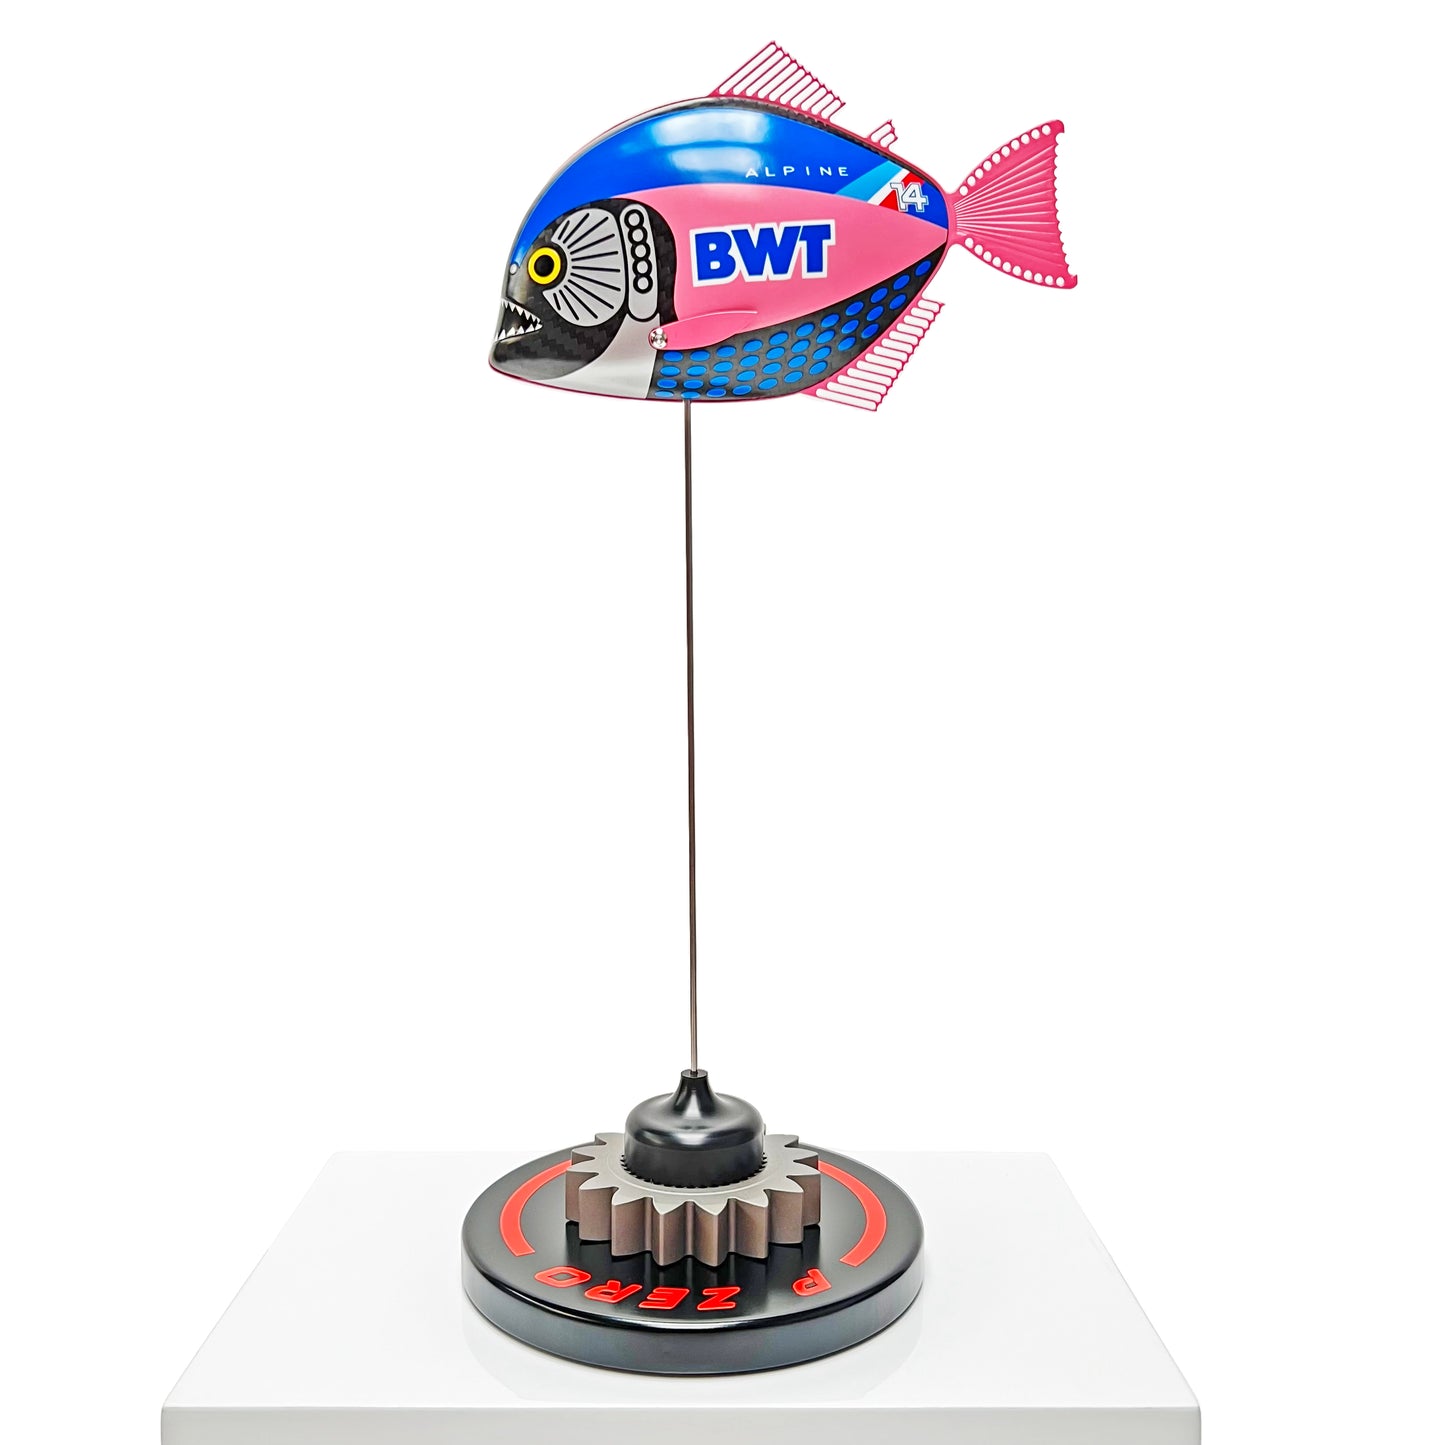 Carbon fibre baby piranha sculpture with Alpine F1 livery on a black base with F1 gear